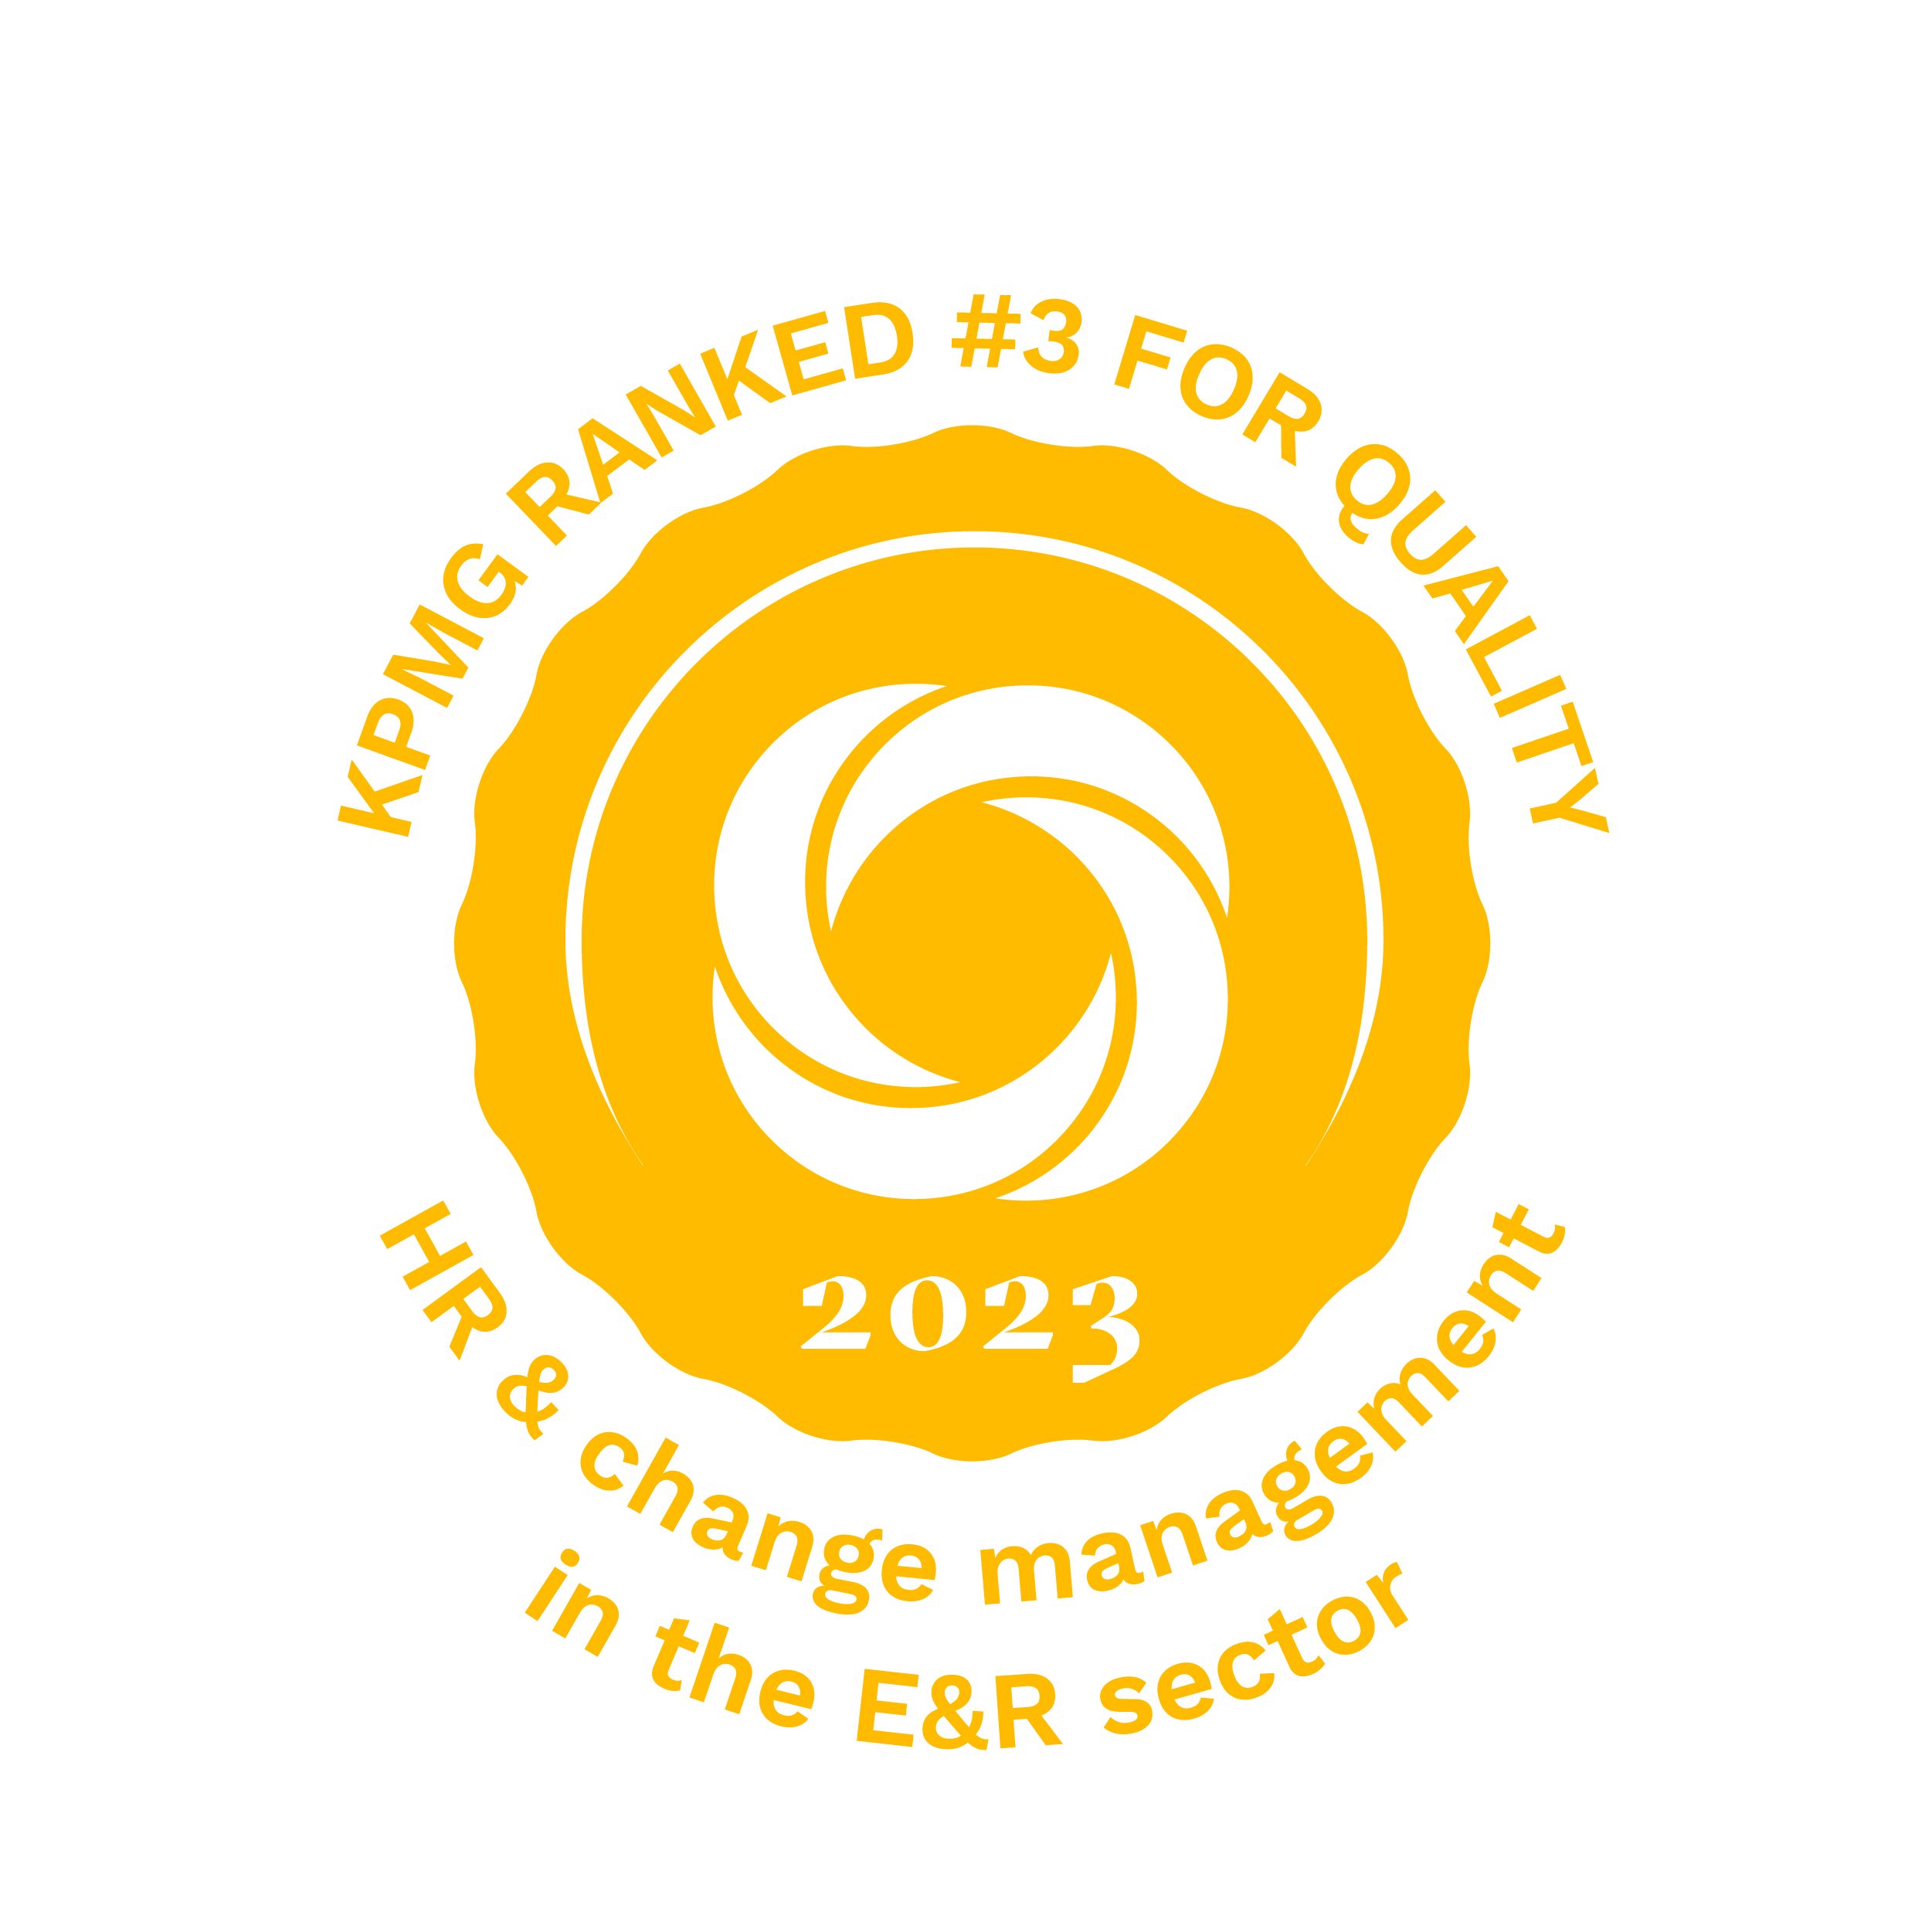 KPMG ranked #3 for quality HR & change management in the E&R sector